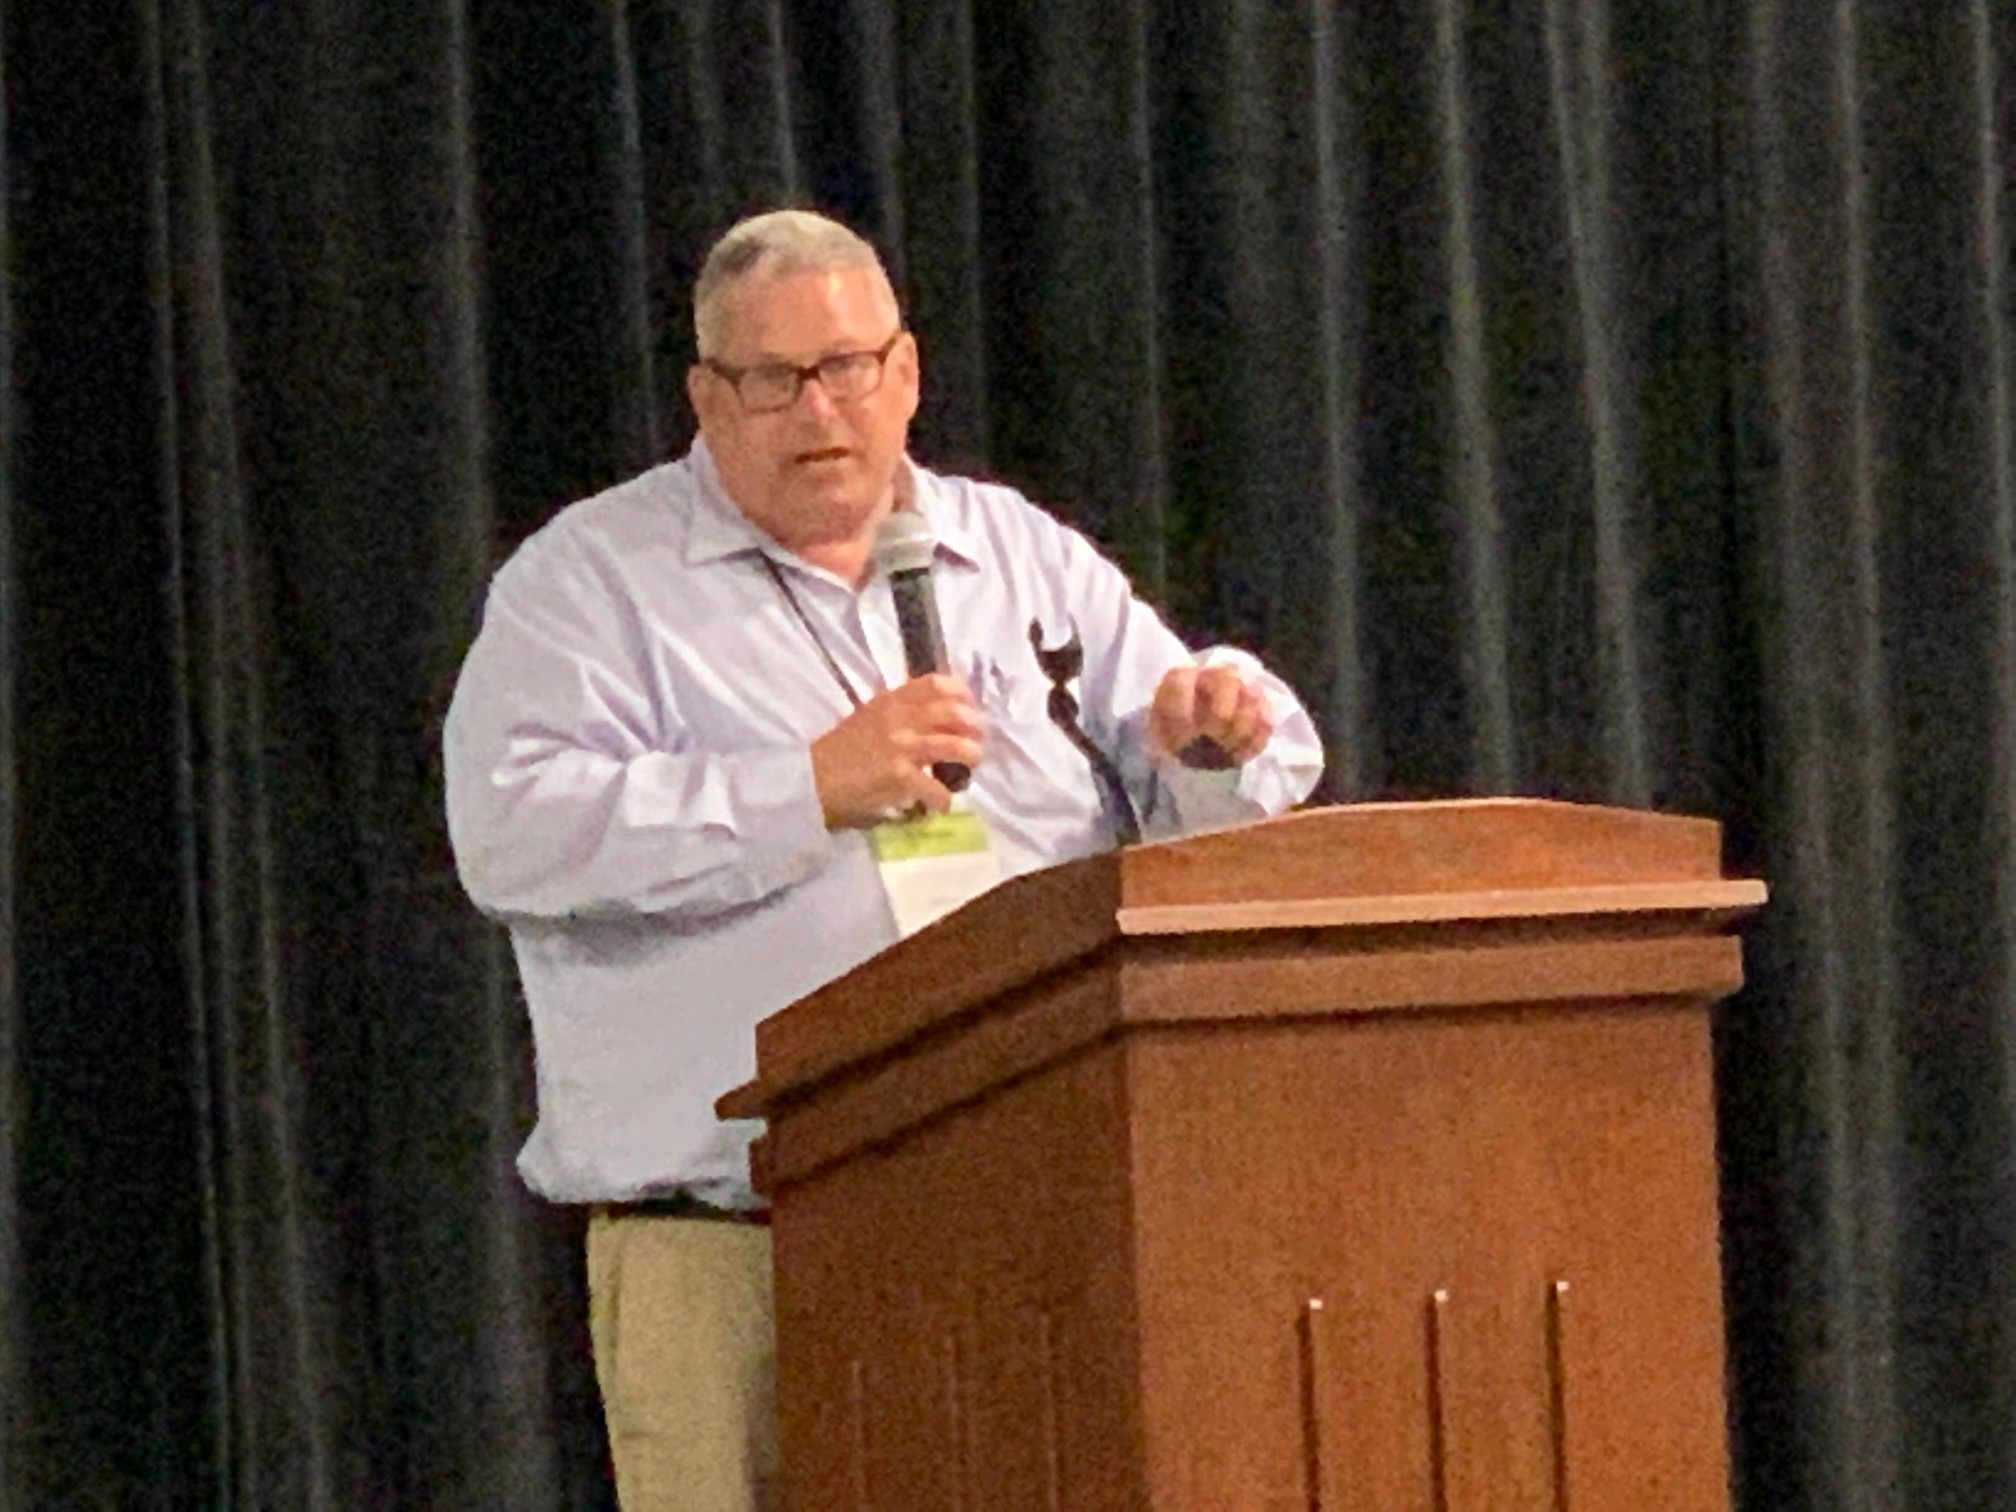 USDA Undersecretary Bill Northey Working to Pull Together Help for Farmers and Ranchers Hurt by Extreme Weather and Retaliatory Tariffs